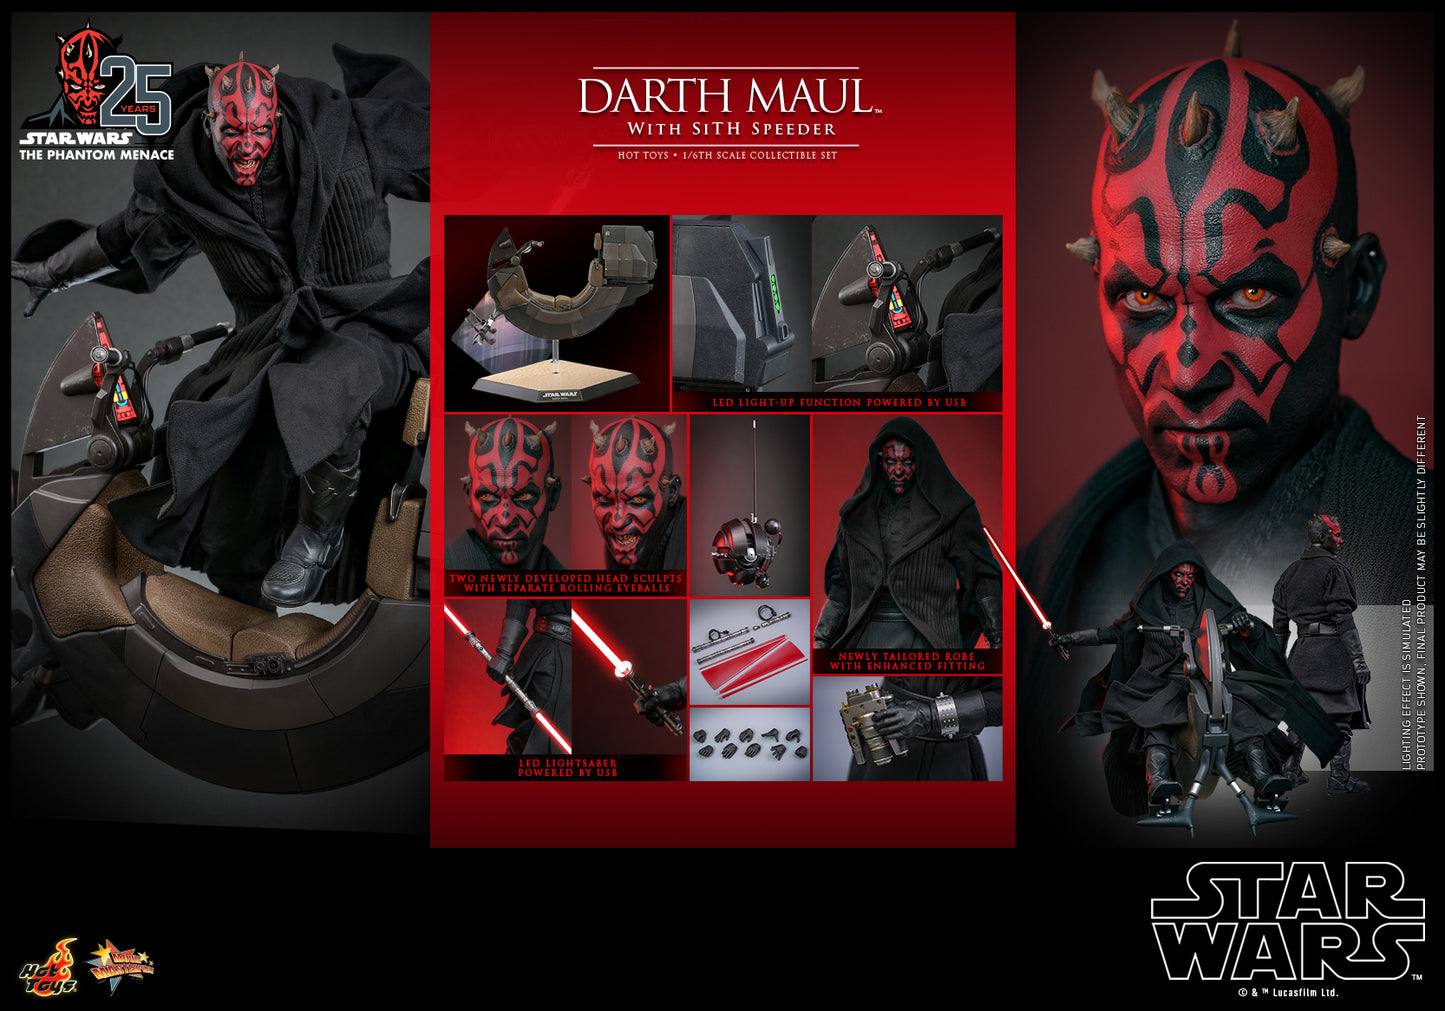 Star Wars Episode I: The Phantom Menace - Darth Maul with Sith Speeder 1:6 Scale Collectible Set